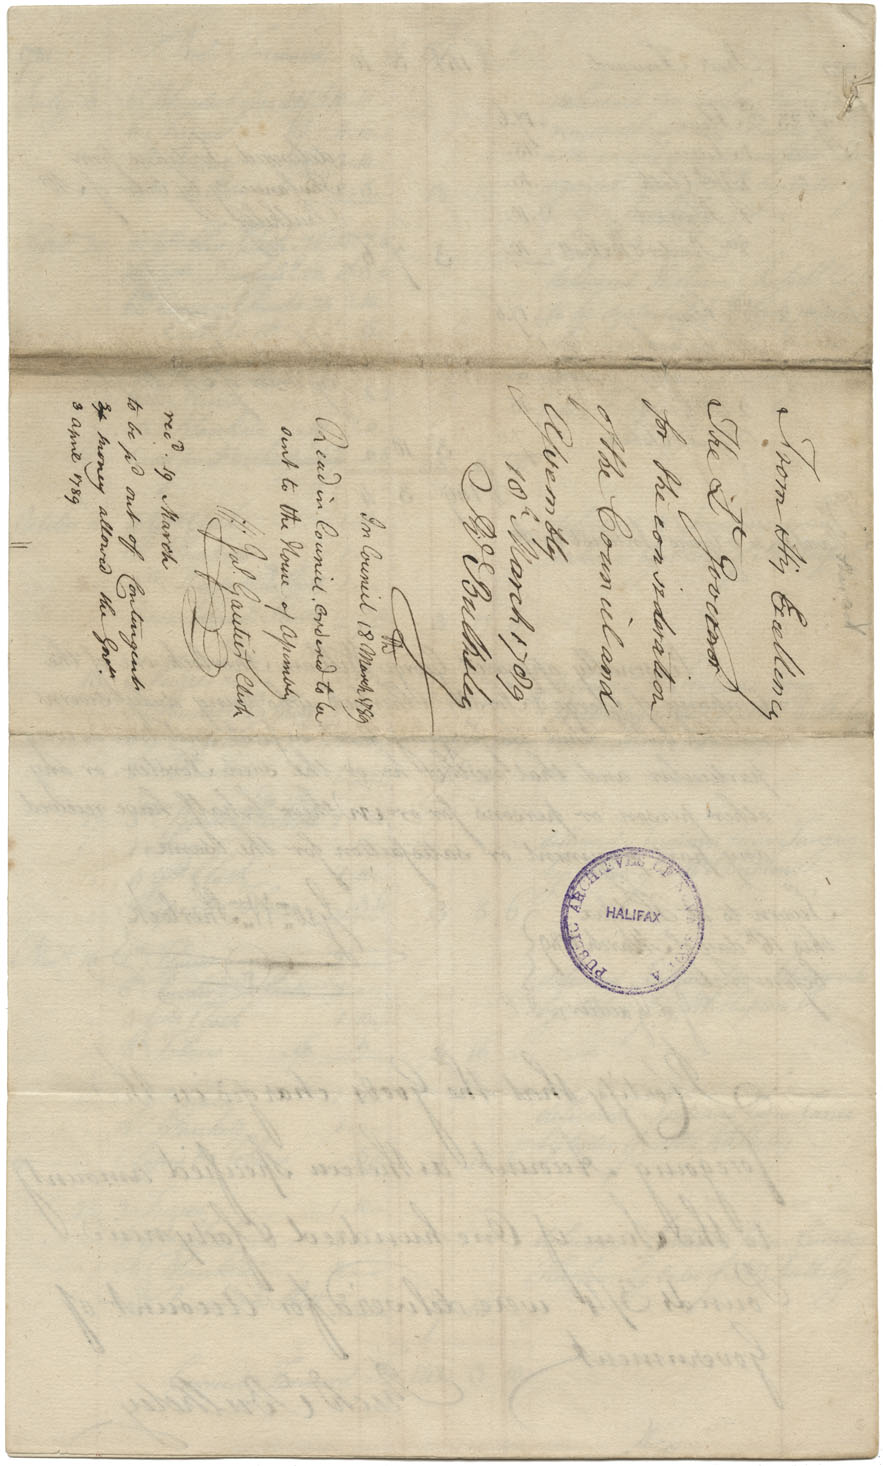 George and Foster Sherlock. Bill for supplies delivered, by order of the Honorable Richard Bulkeley, to Mi'kmaq and other distressed inhabitants of this province in the years 1780, 1781 and 1782.